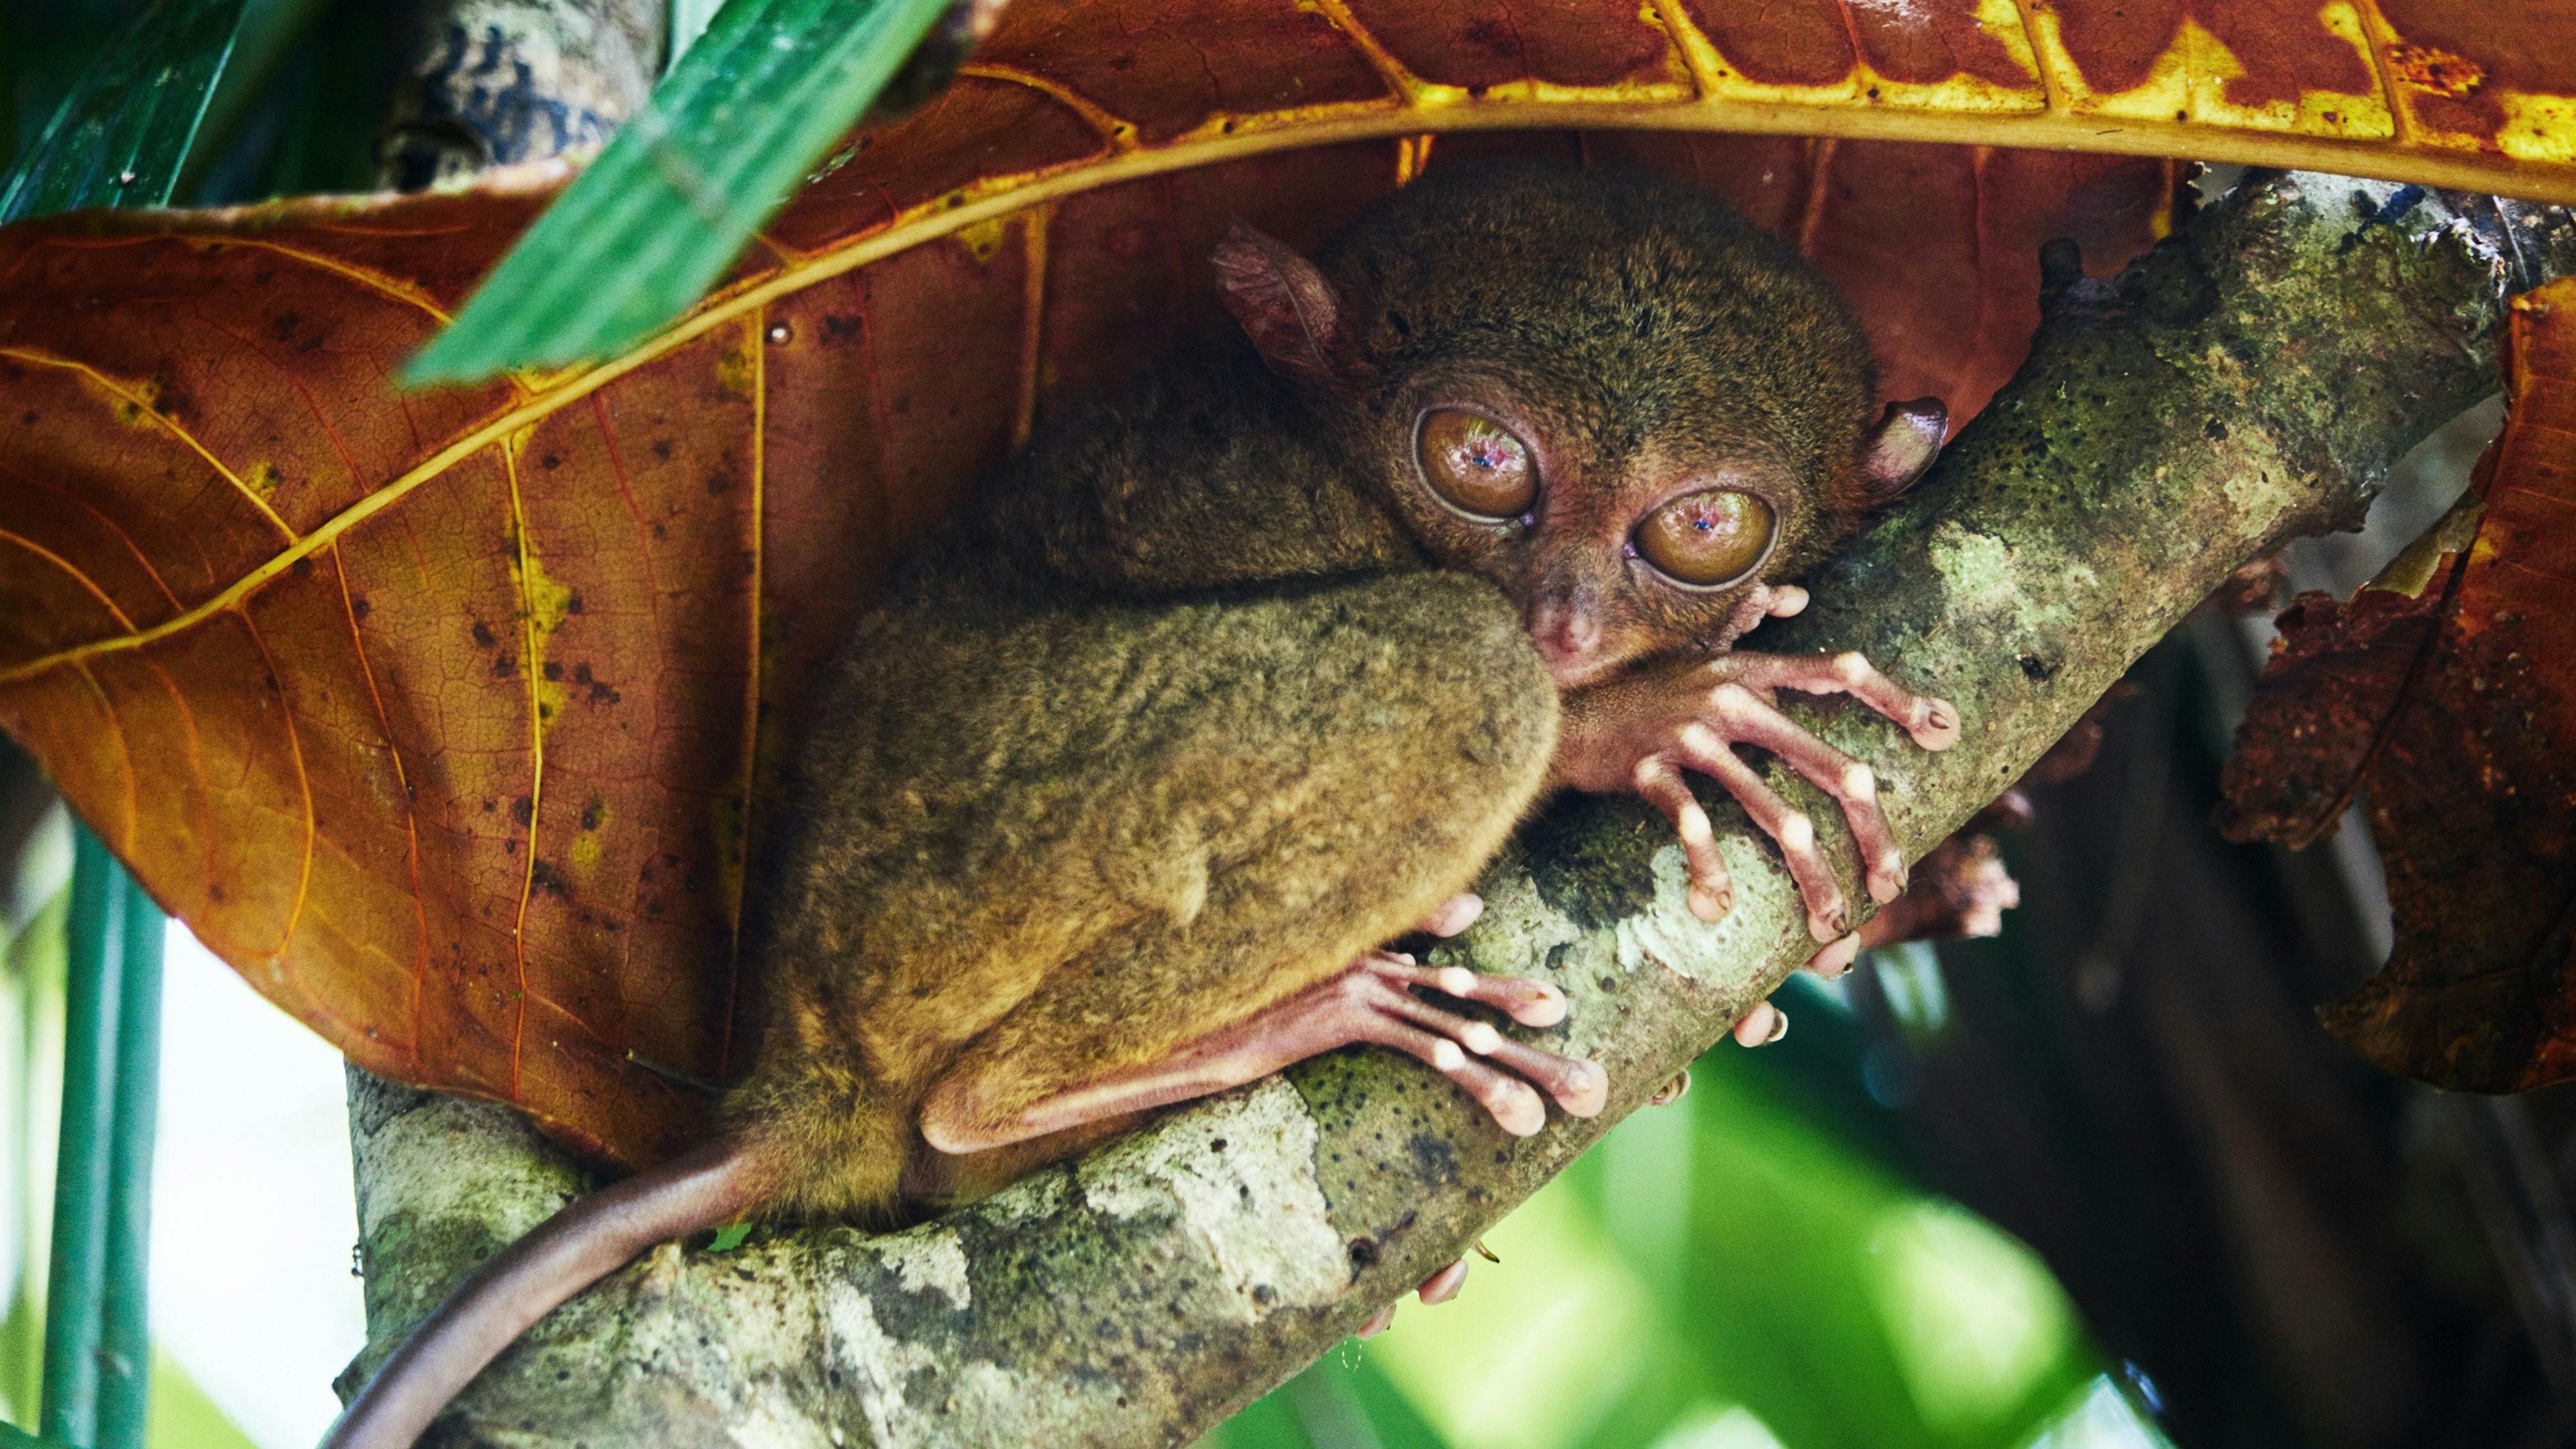 Tarsier on a tree branch in Philippines.